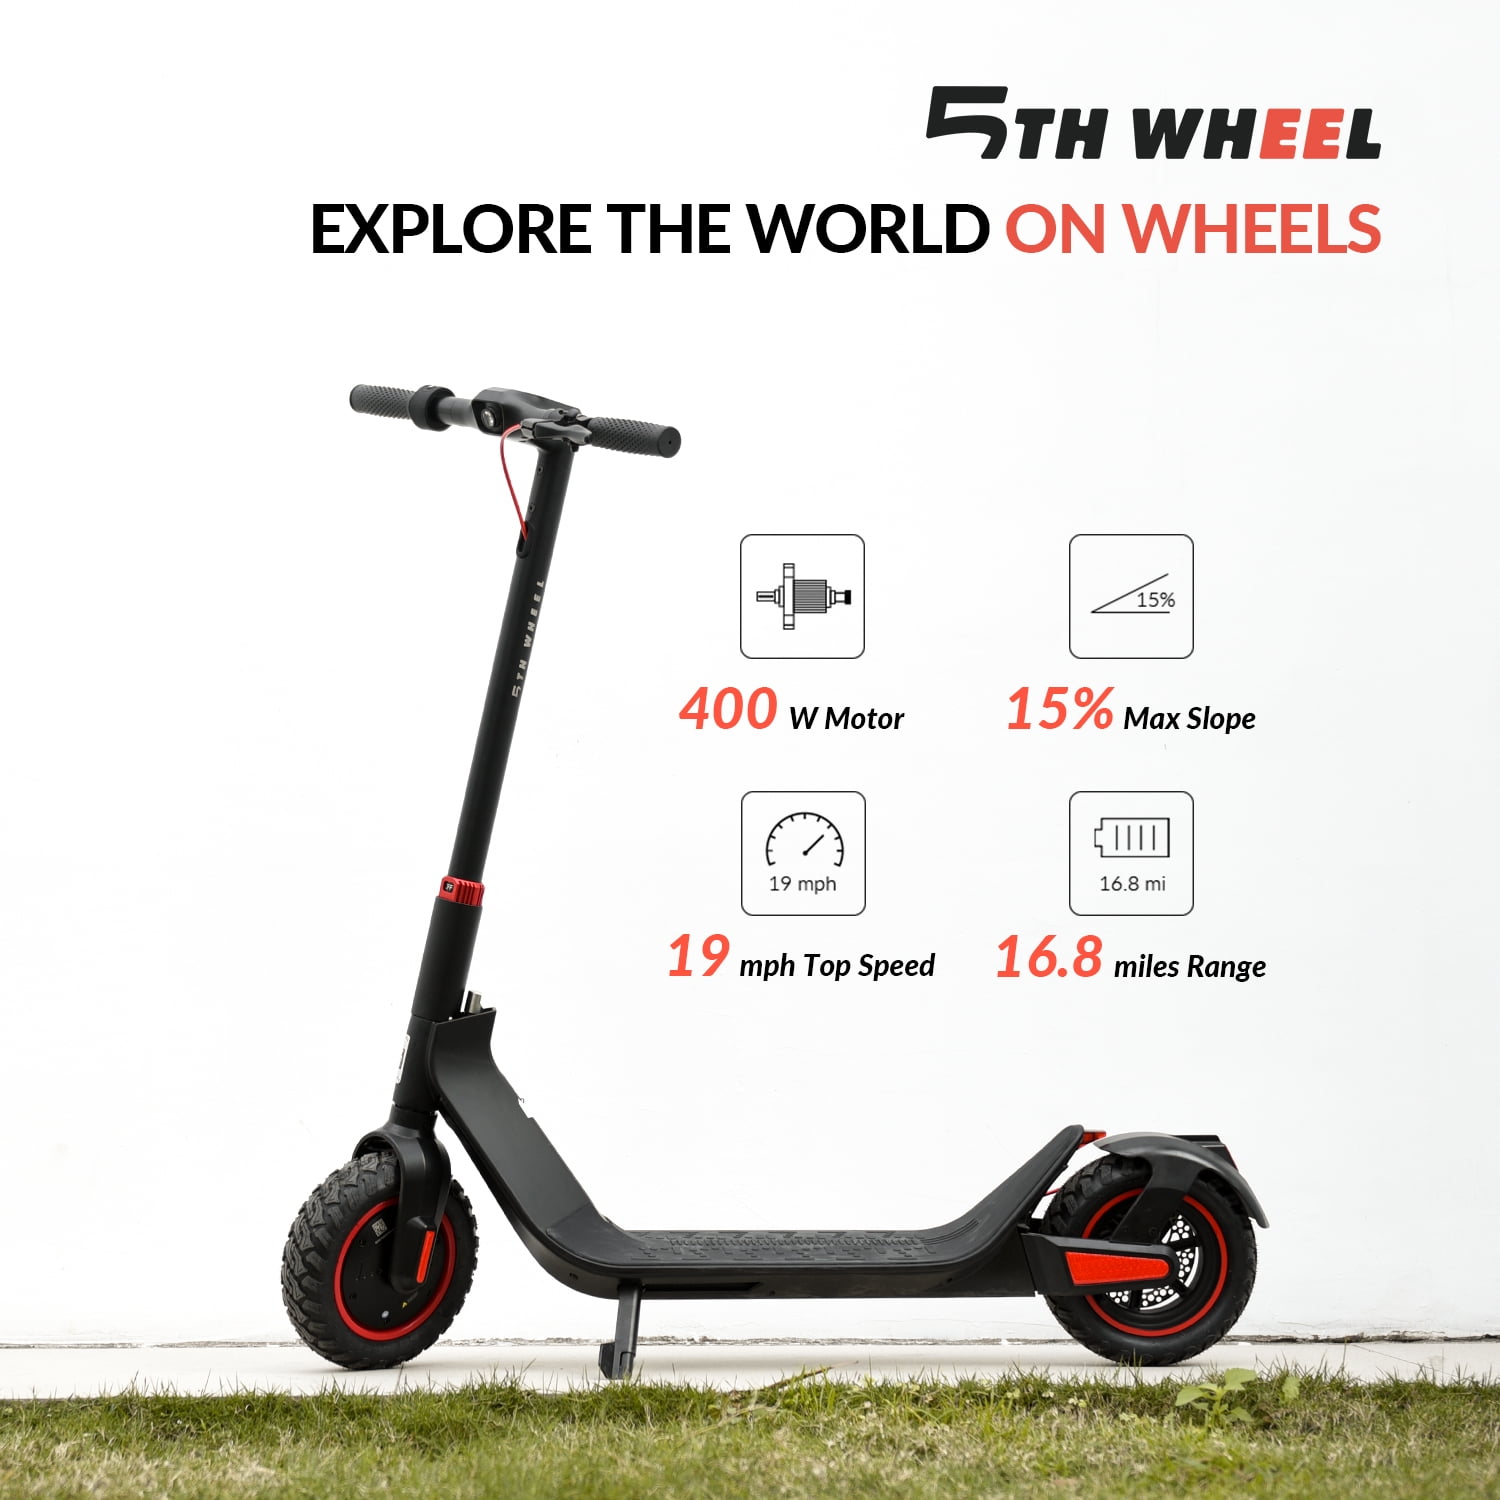 High Performance 5TH WHEEL G1 Infinity E1 Electric Scooter With 10  Pneumatic Tires, 400W Rear Drive, 30km/H Max Speed, 36V 10Ah Battery, And  27km Range From Jetboard, $456.89